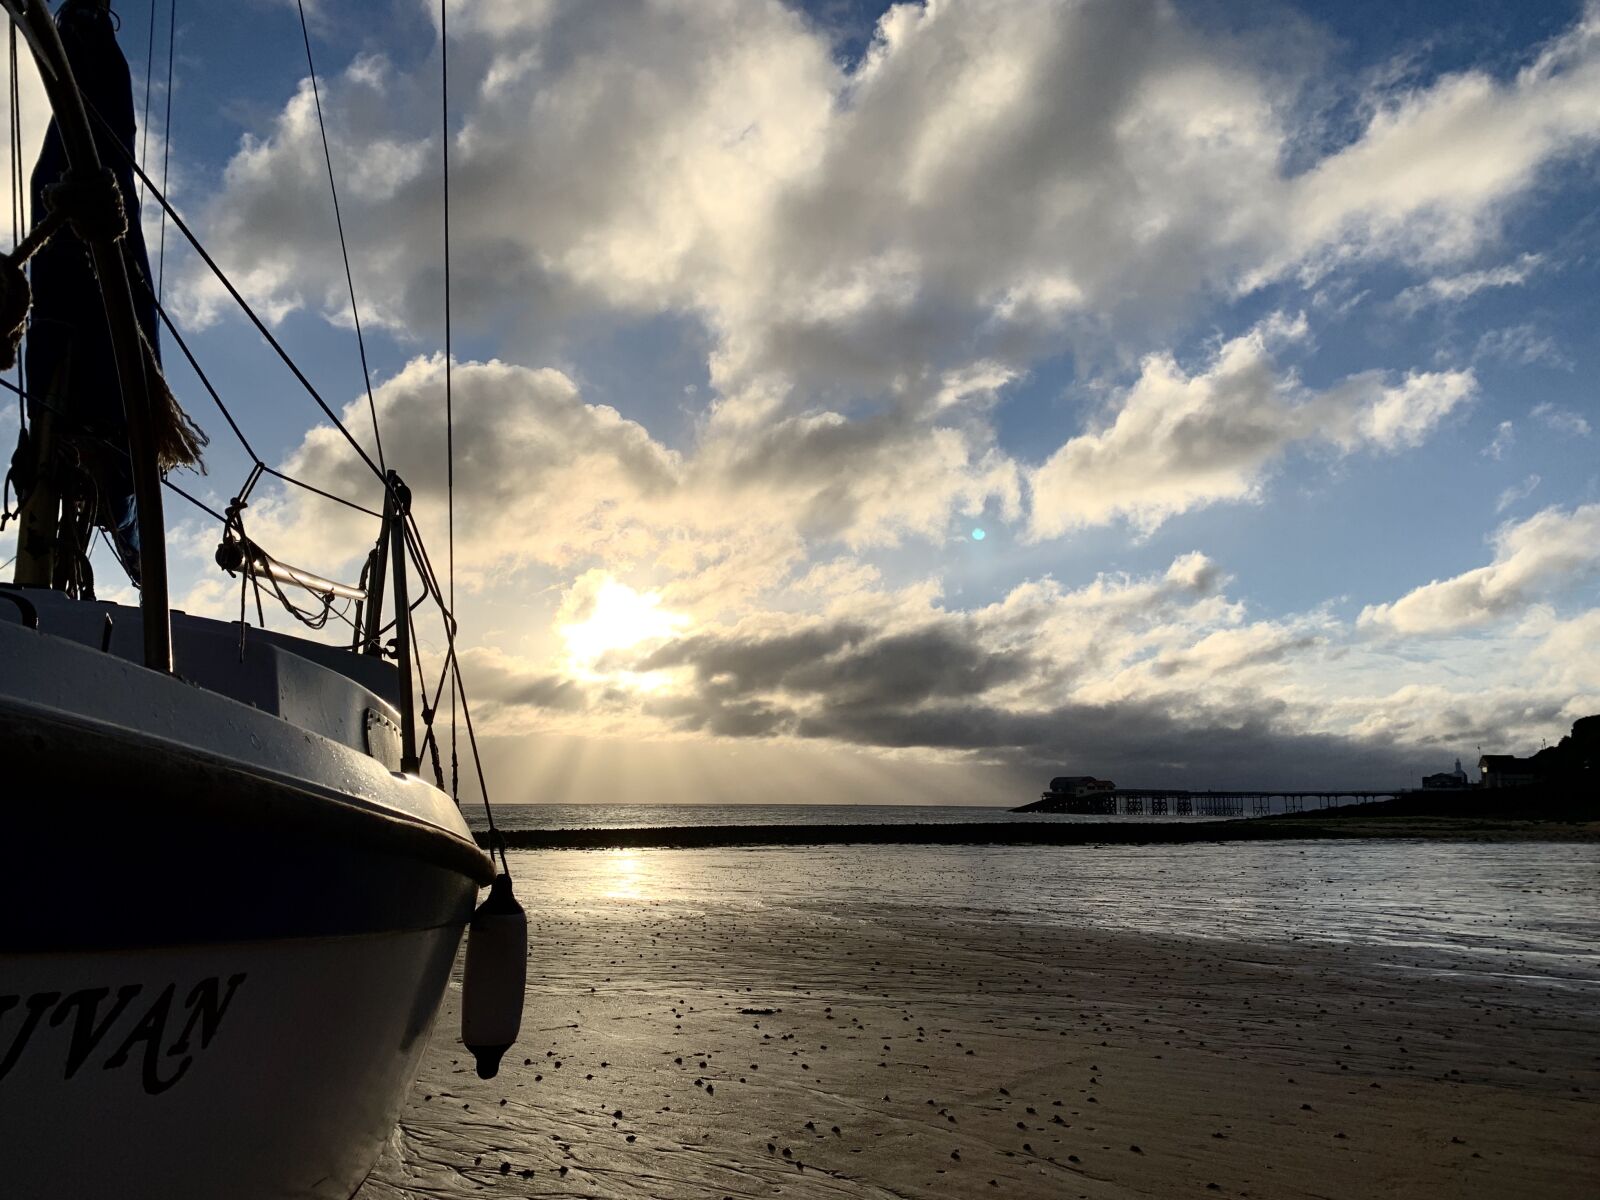 iPhone XS back dual camera 4.25mm f/1.8 sample photo. Yacht, clouds, low tide photography